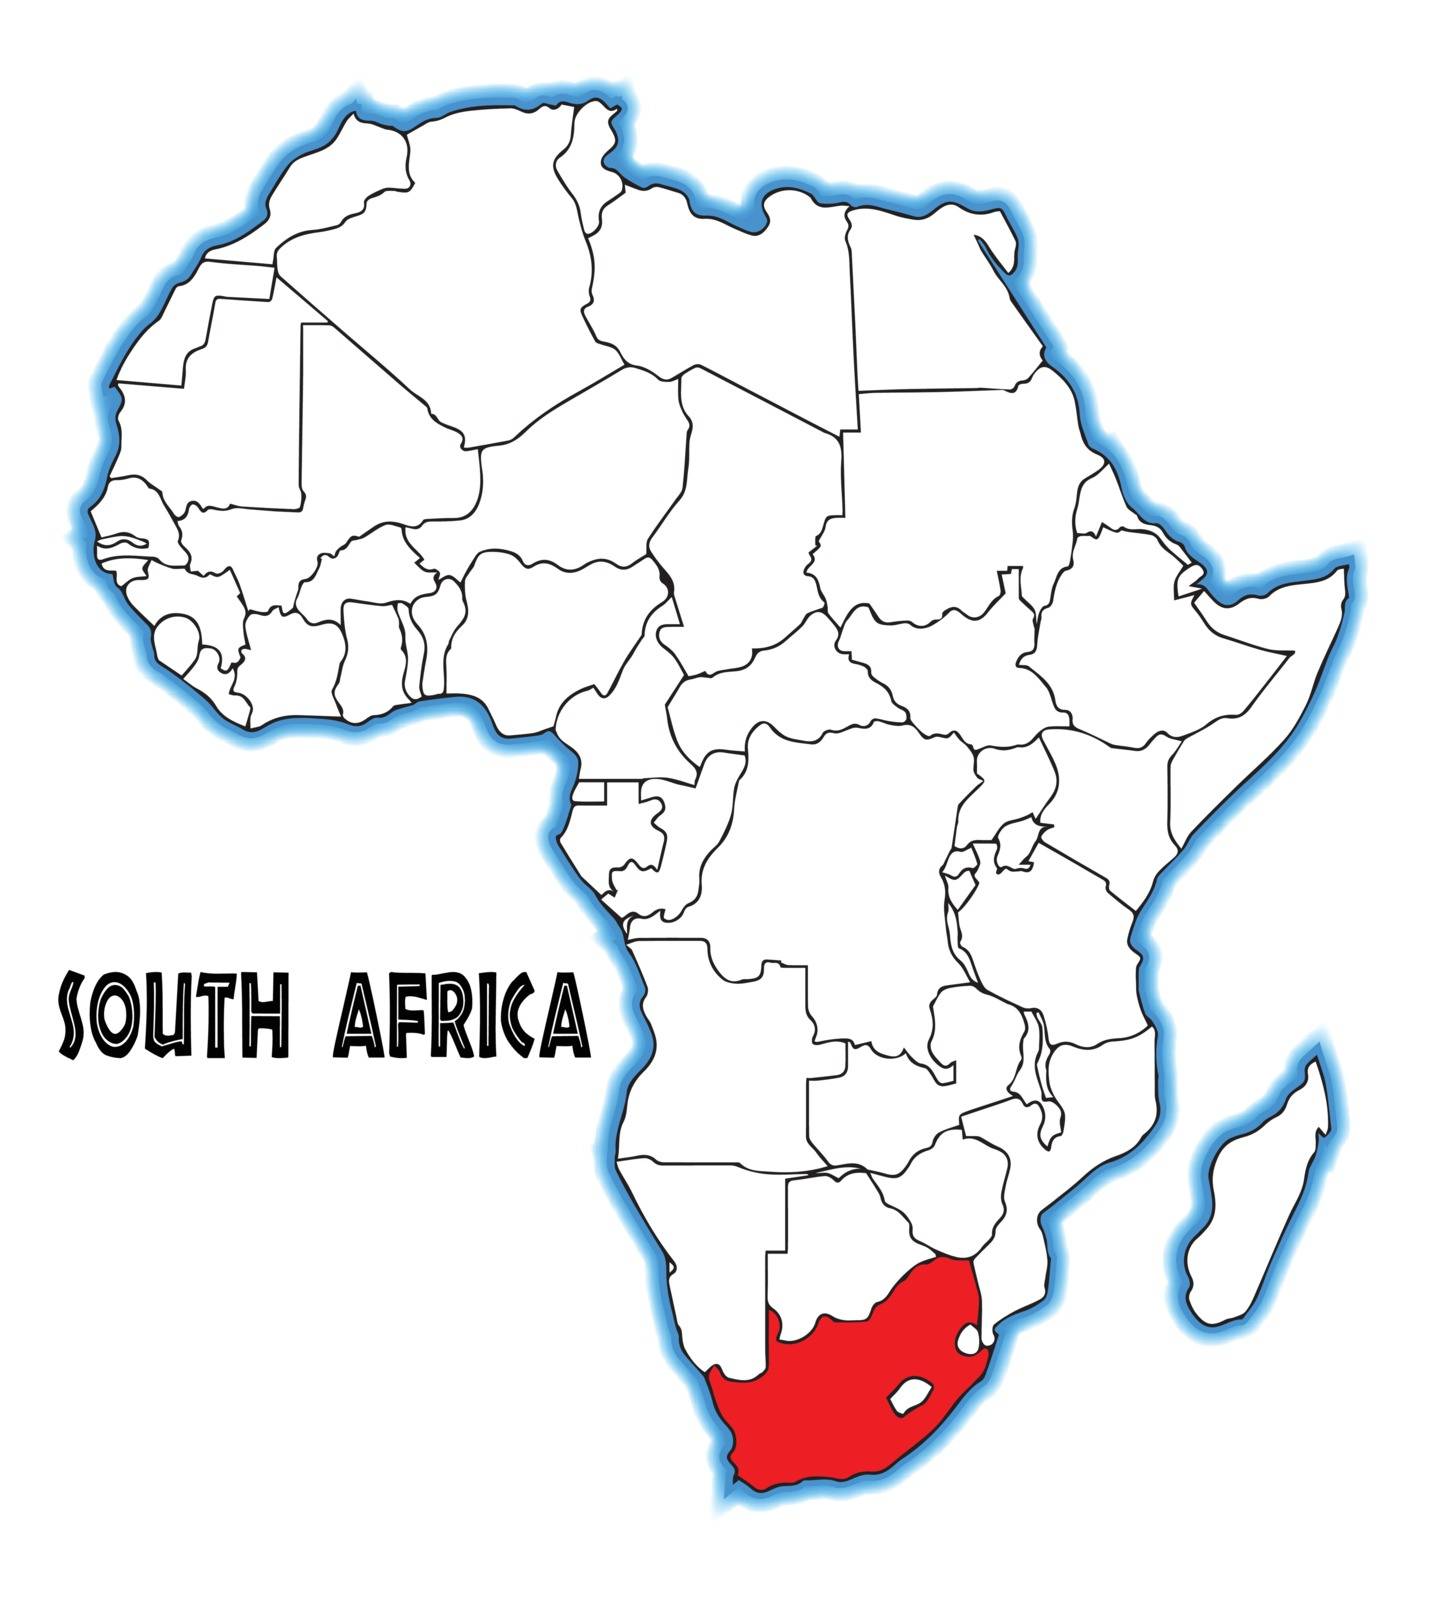 South Africa outline inset into a map of Africa over a white background